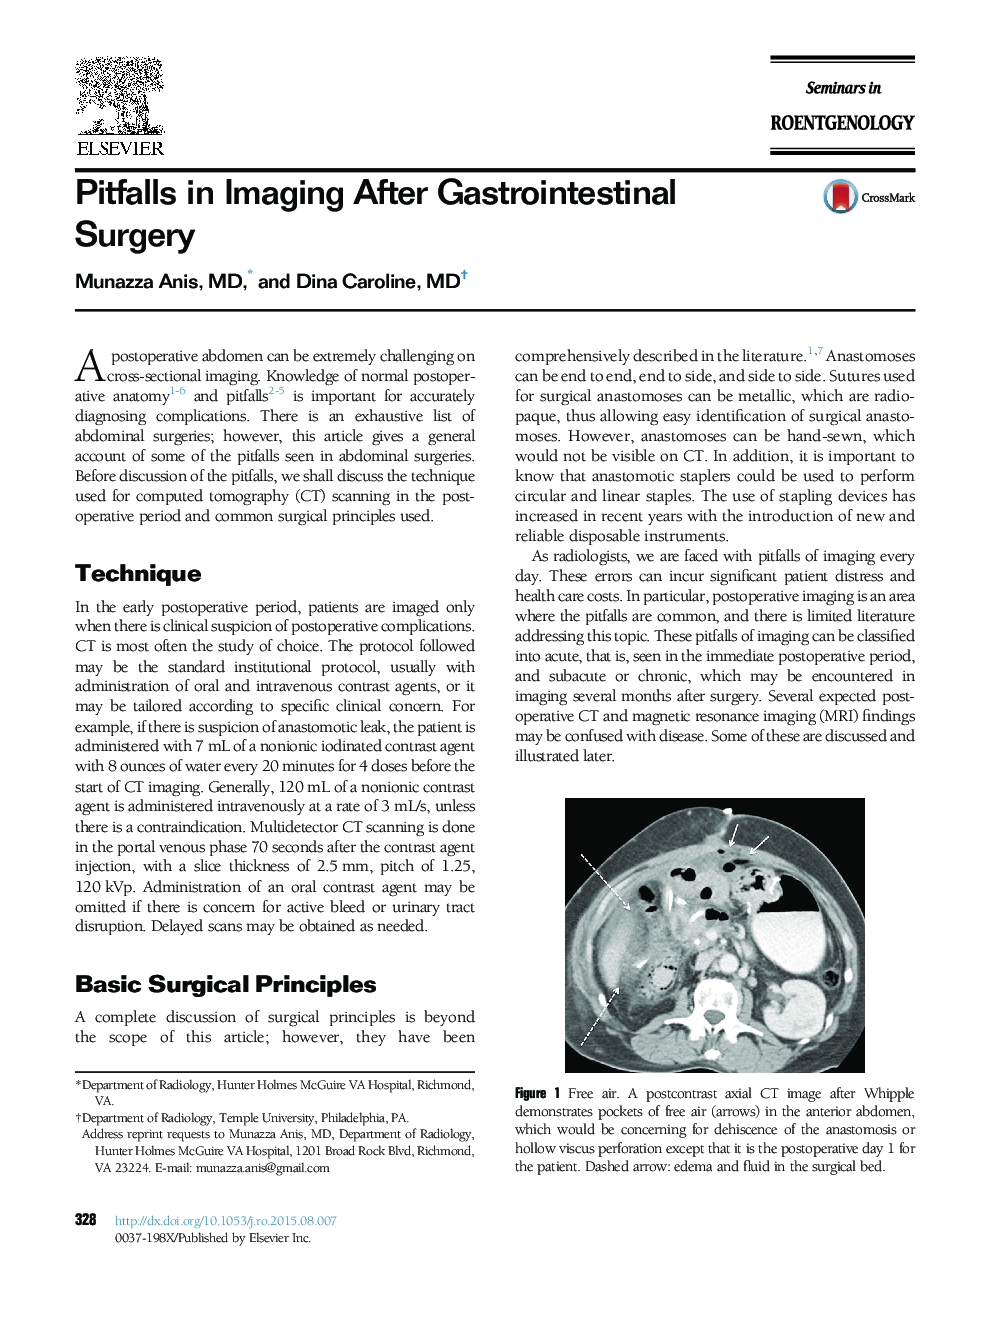 Pitfalls in Imaging After Gastrointestinal Surgery